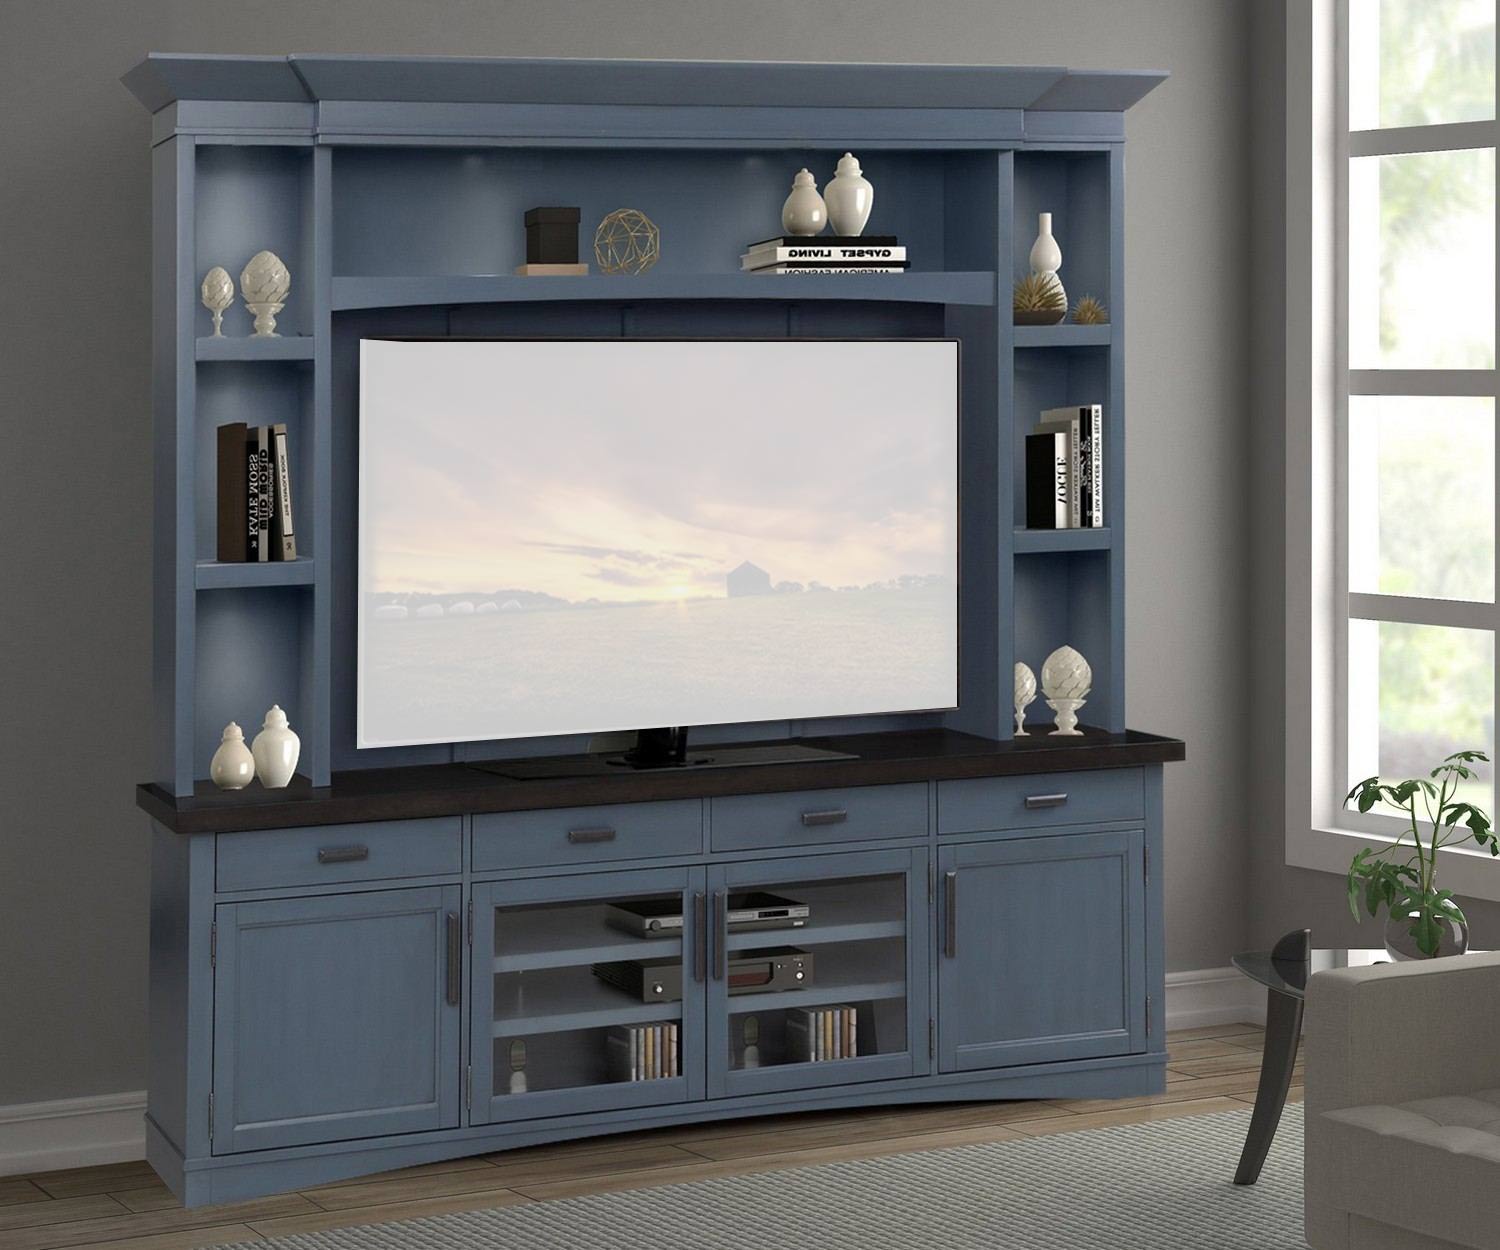 Parker House Americana Modern 92 Inch TV Console with Hutch, Backpanel and LED Lights - Denim